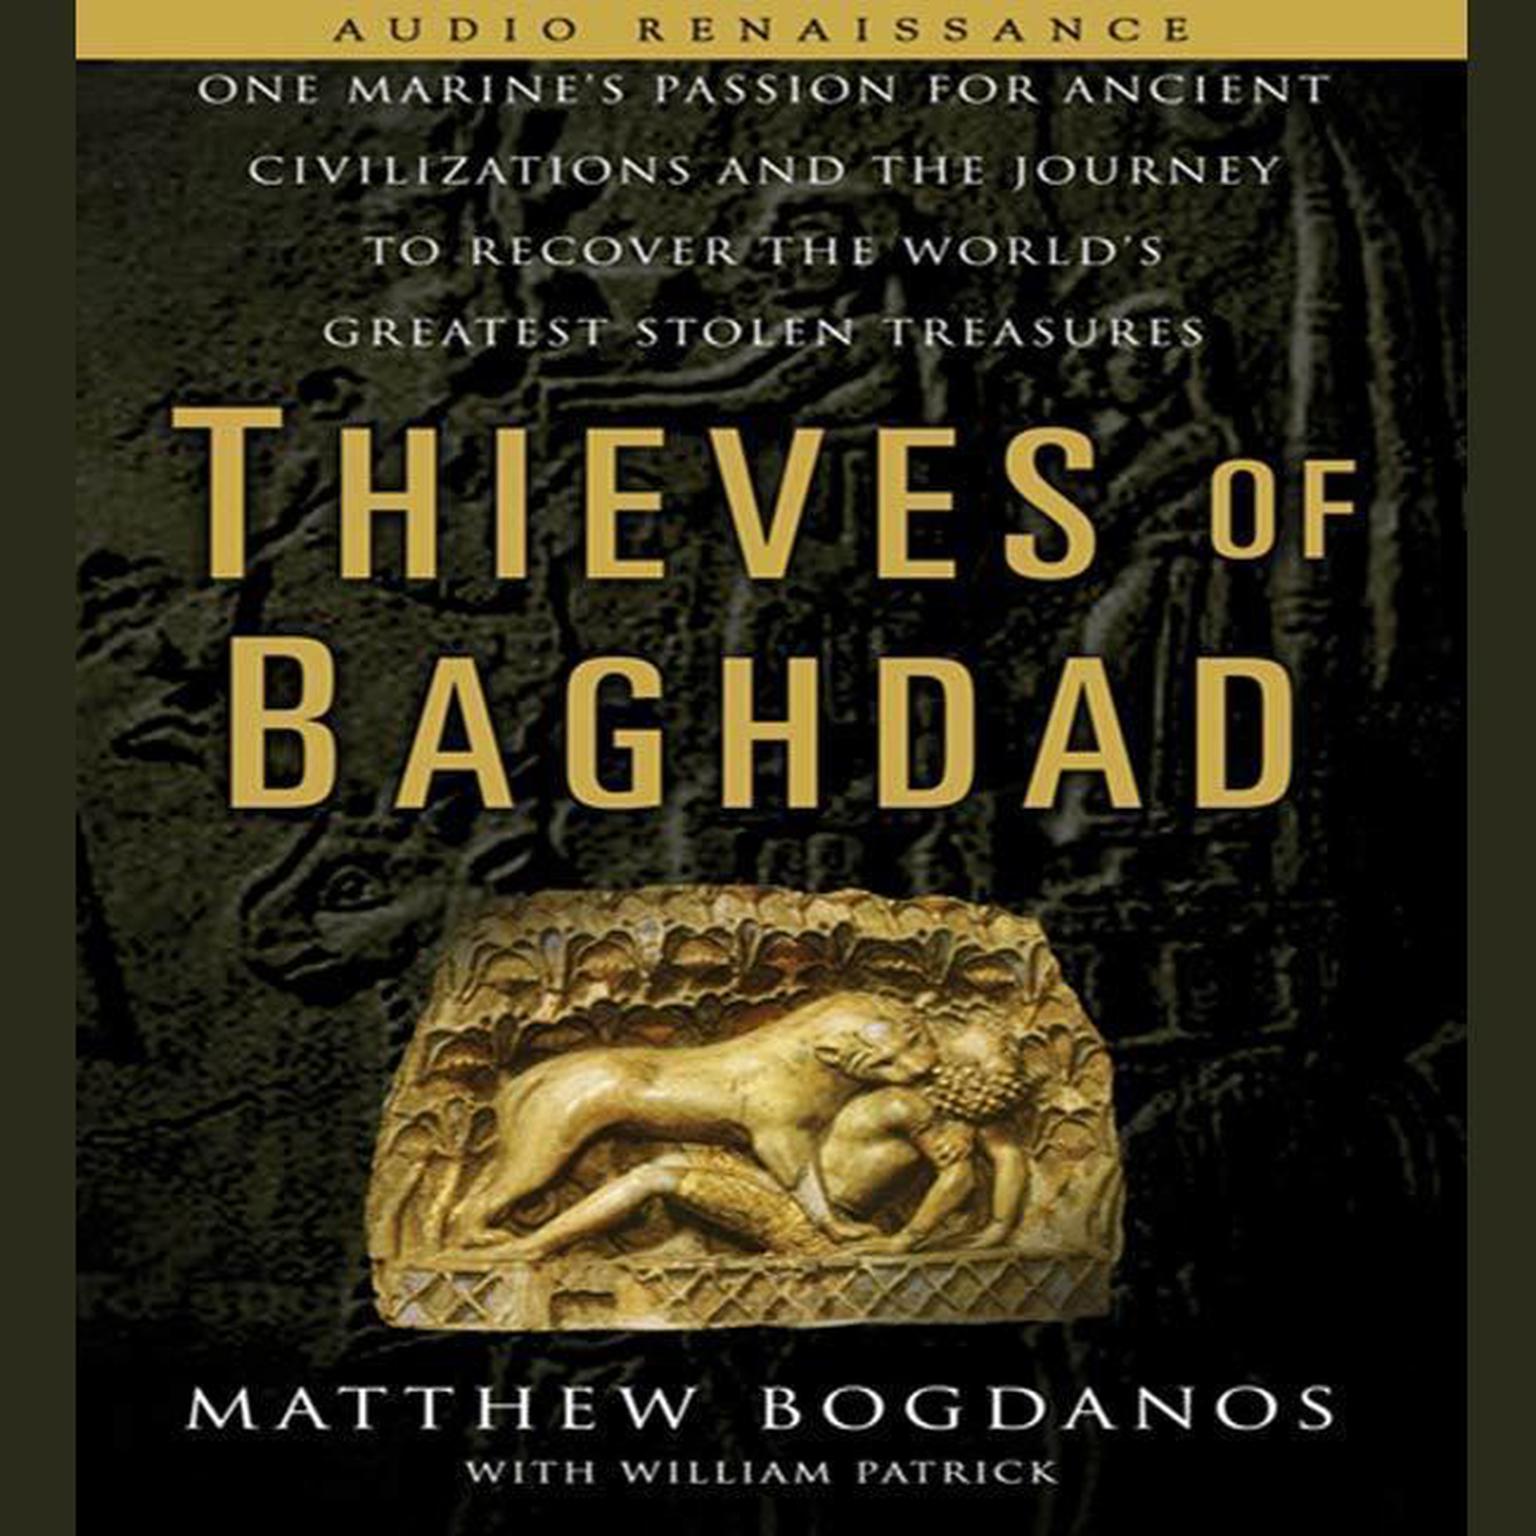 Thieves of Baghdad (Abridged): One Marines Passion for Ancient Civilizations and the Journey to Recover the Worlds Greatest Stolen Treasures Audiobook, by Matthew Bogdanos